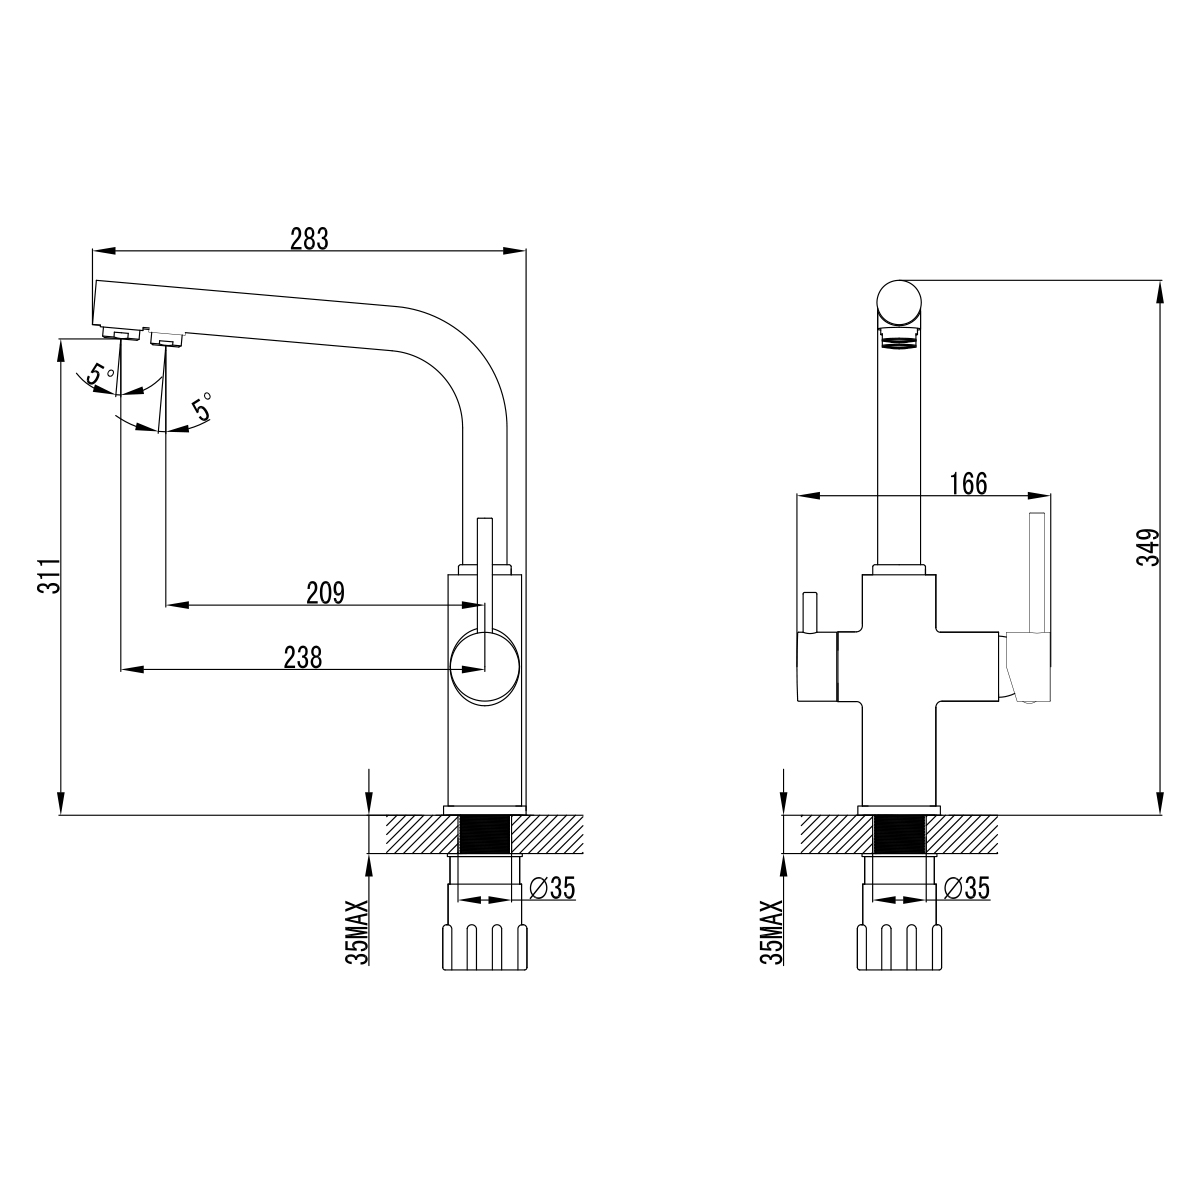 LM3060C Kitchen faucet
with connection to drinking
water supply